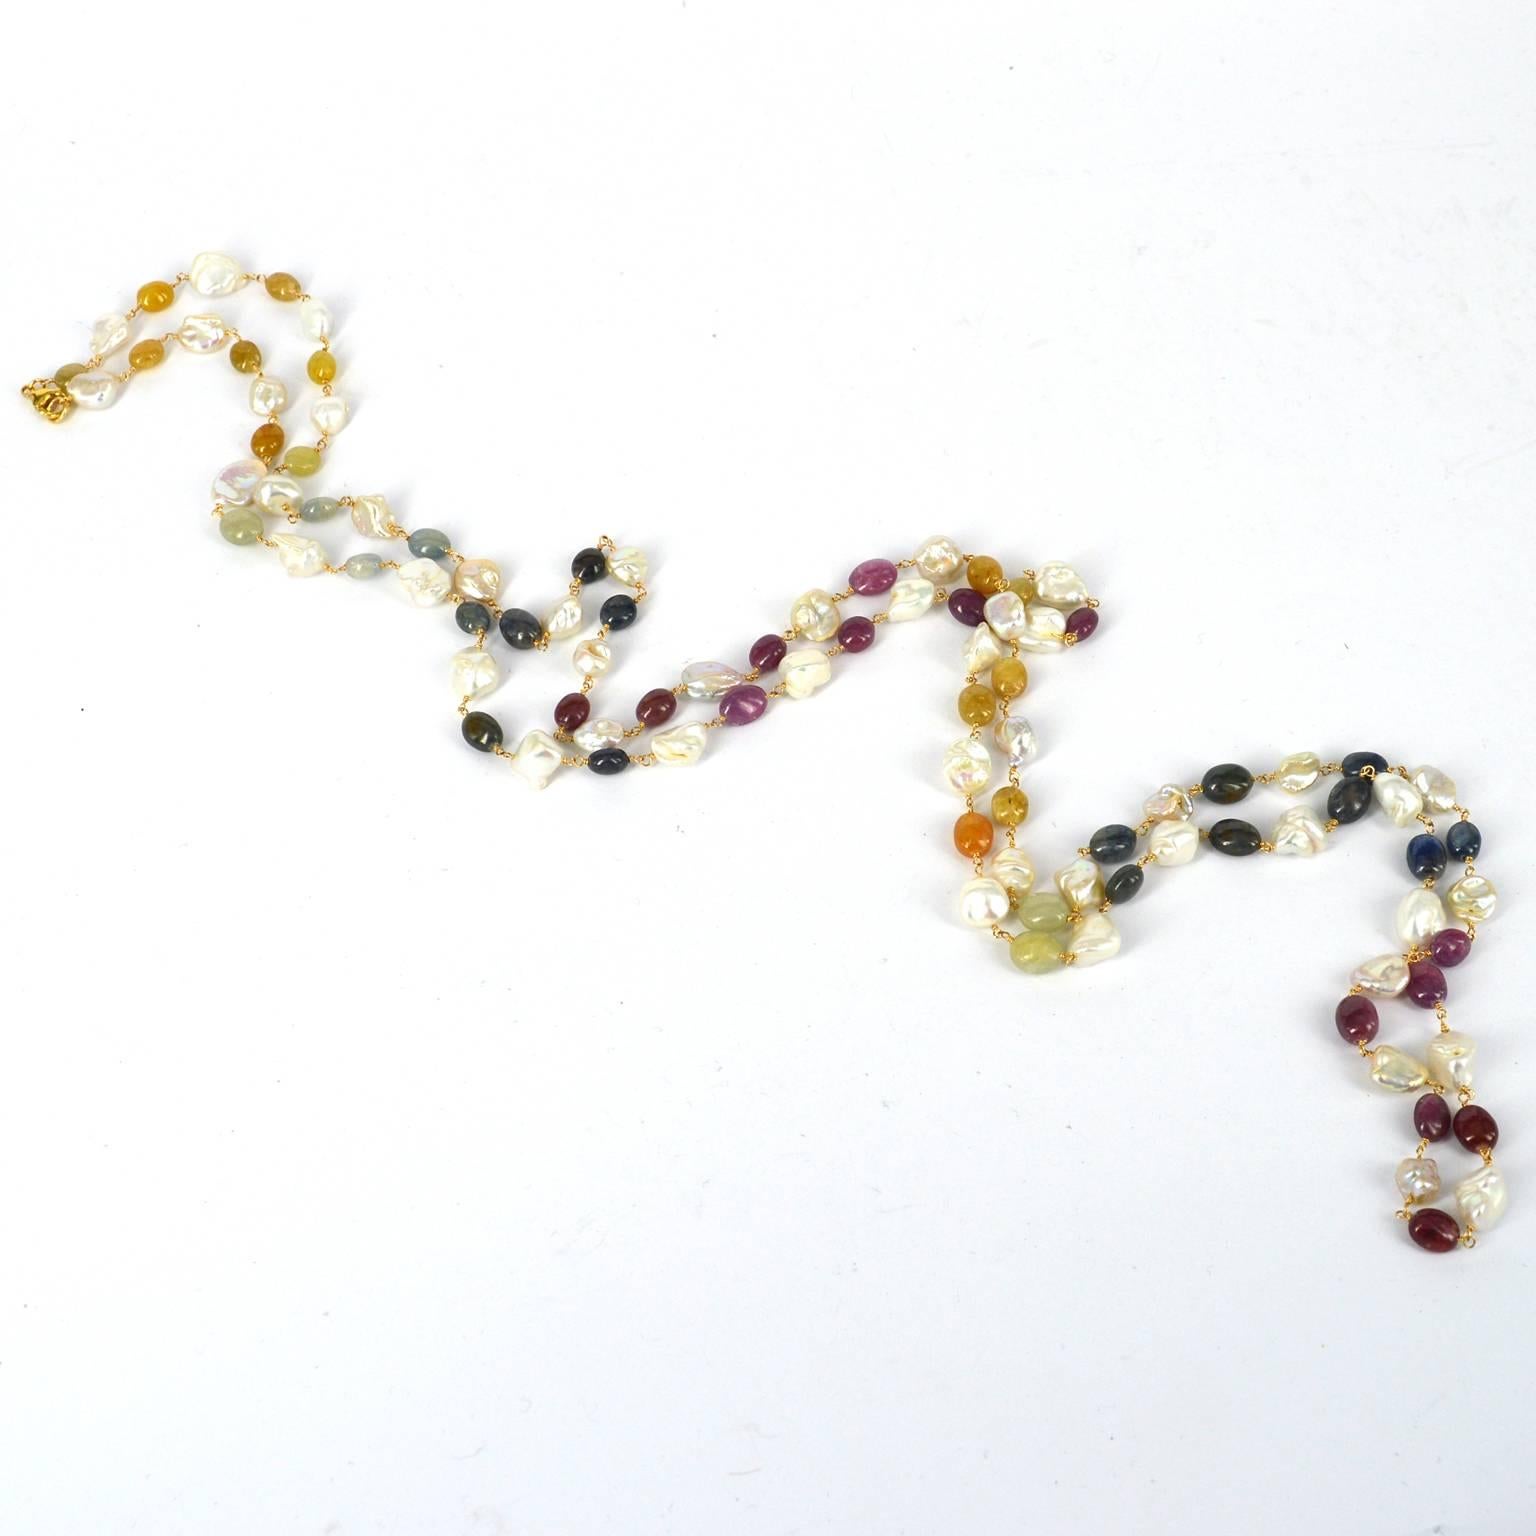 Natural polished multi color Sapphire nuggets 9x8mm with 9-10mm Fresh Water Keshi Pearls individually wire wrapped with 14k Gold Filled wire and a 14k Gold filled lobster clasp.
Finished necklace measures 145cm